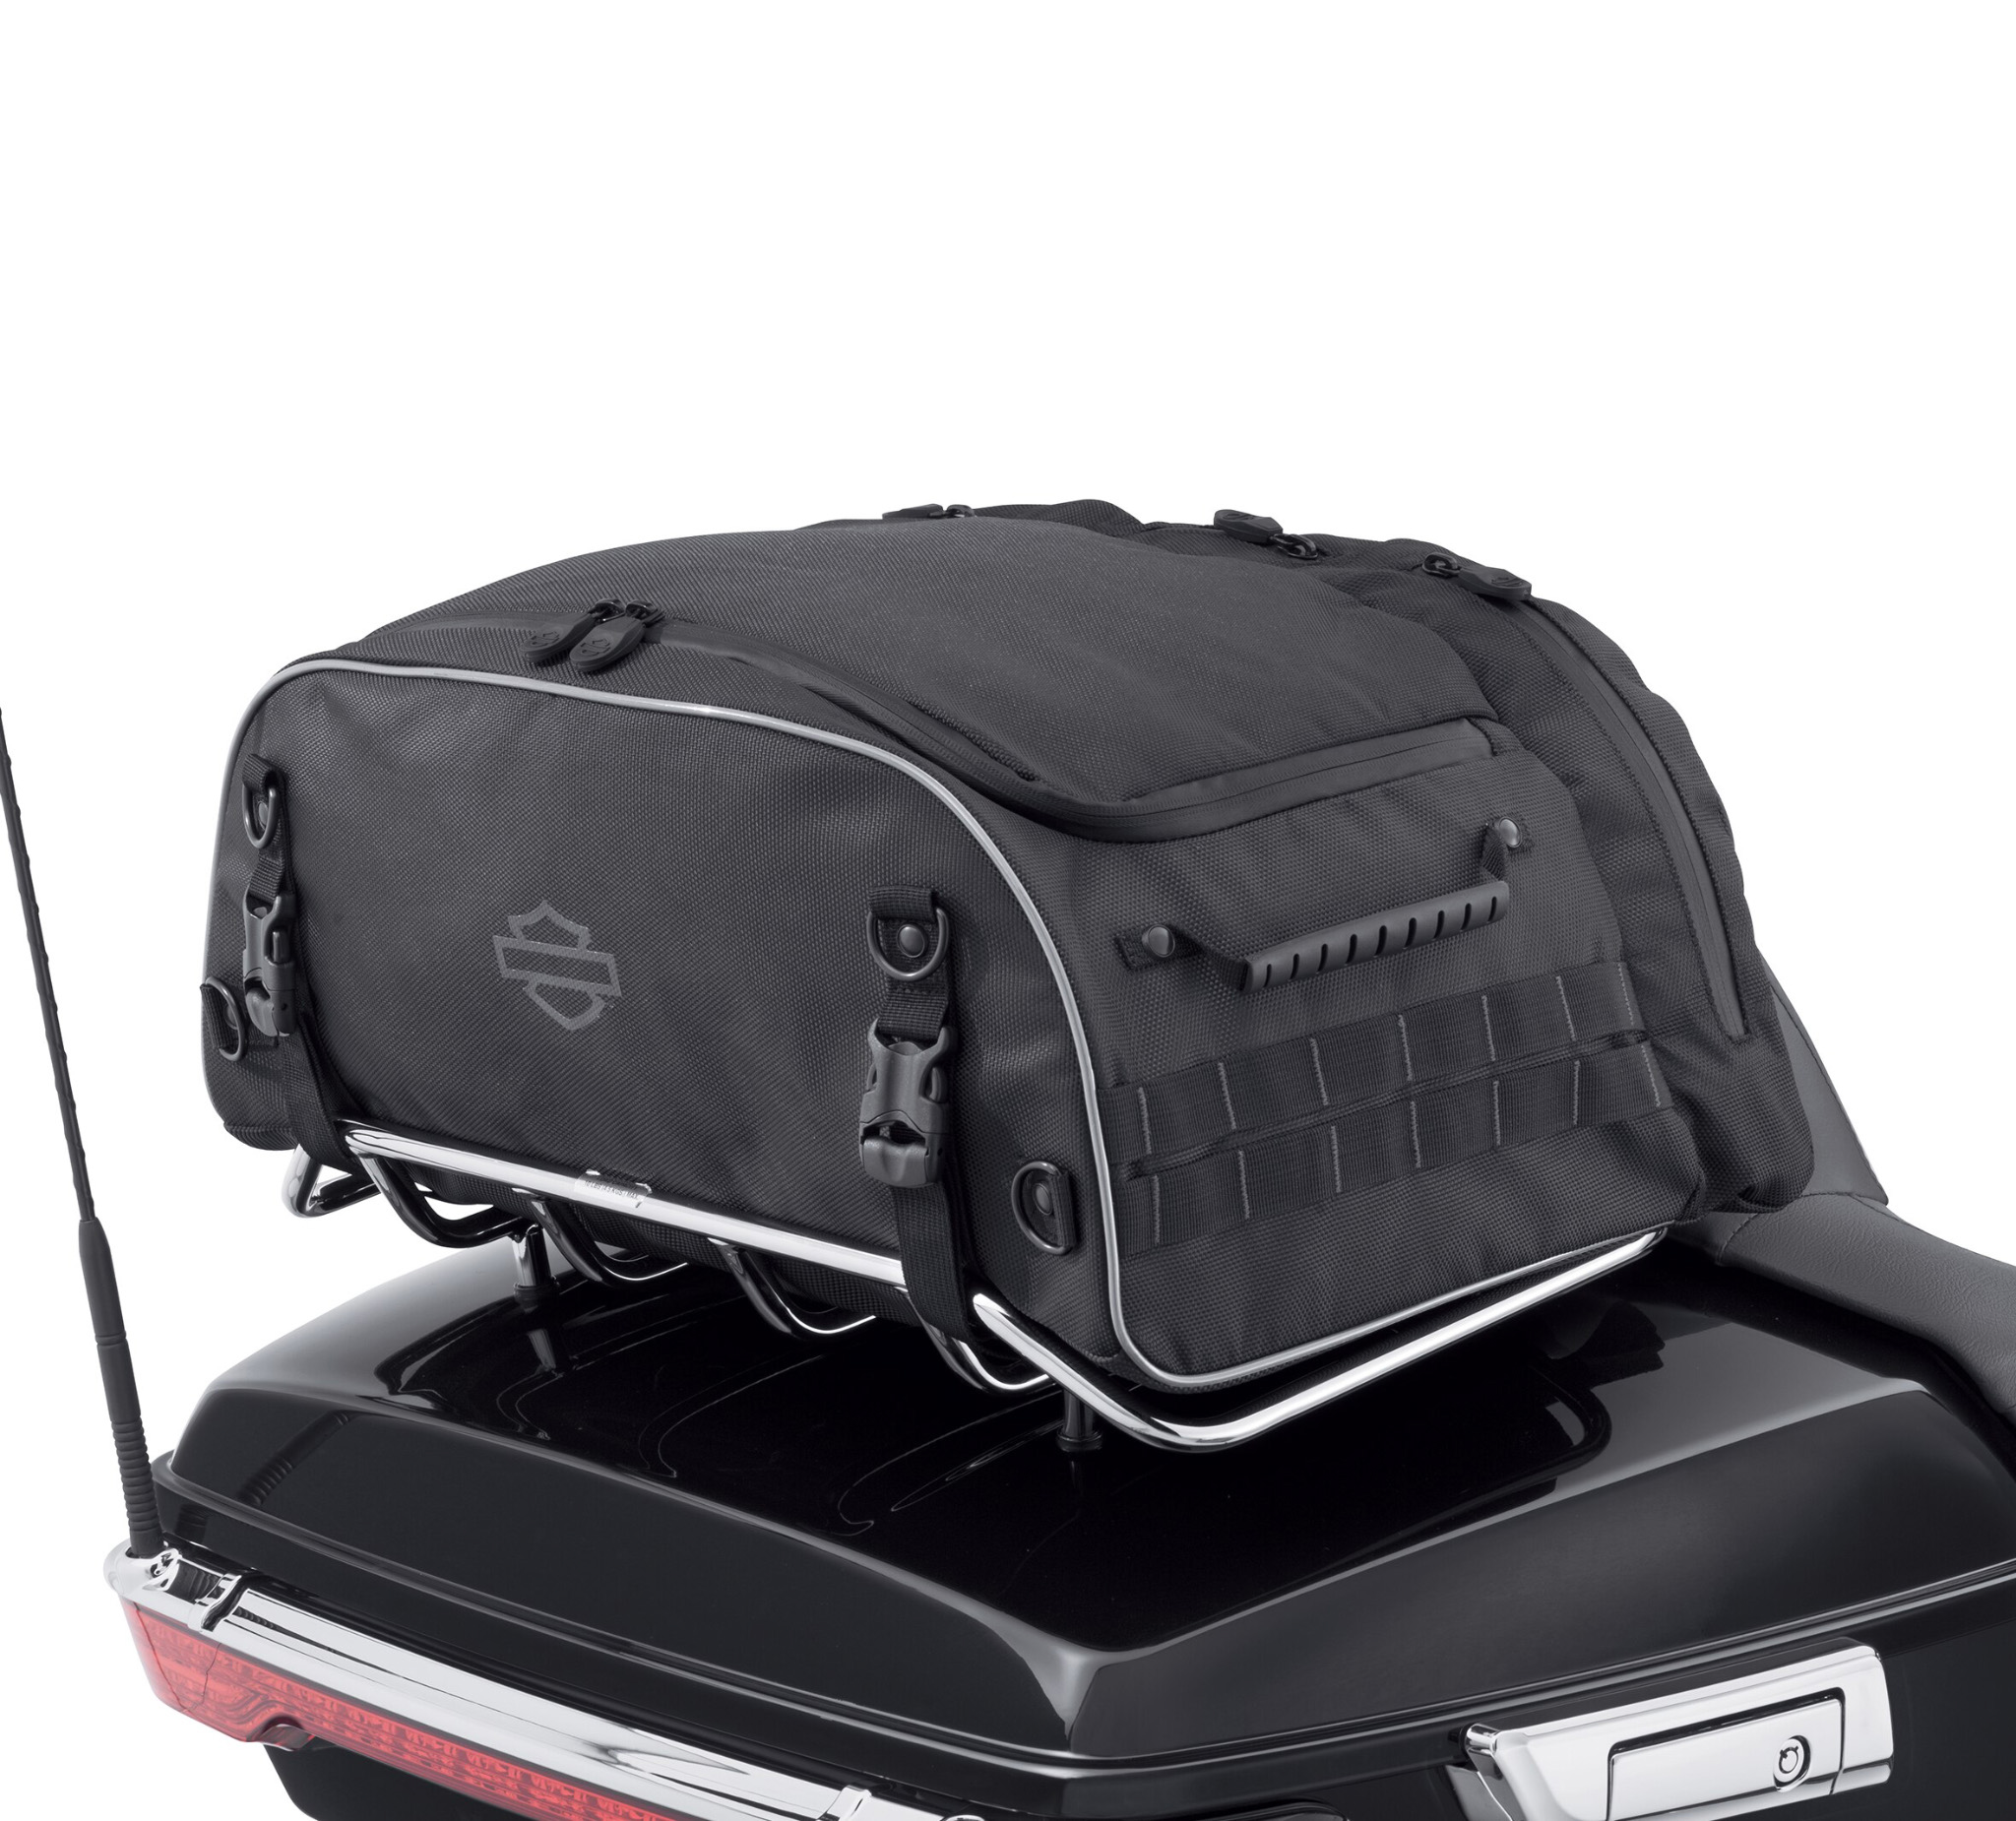 touring bags for motorcycles